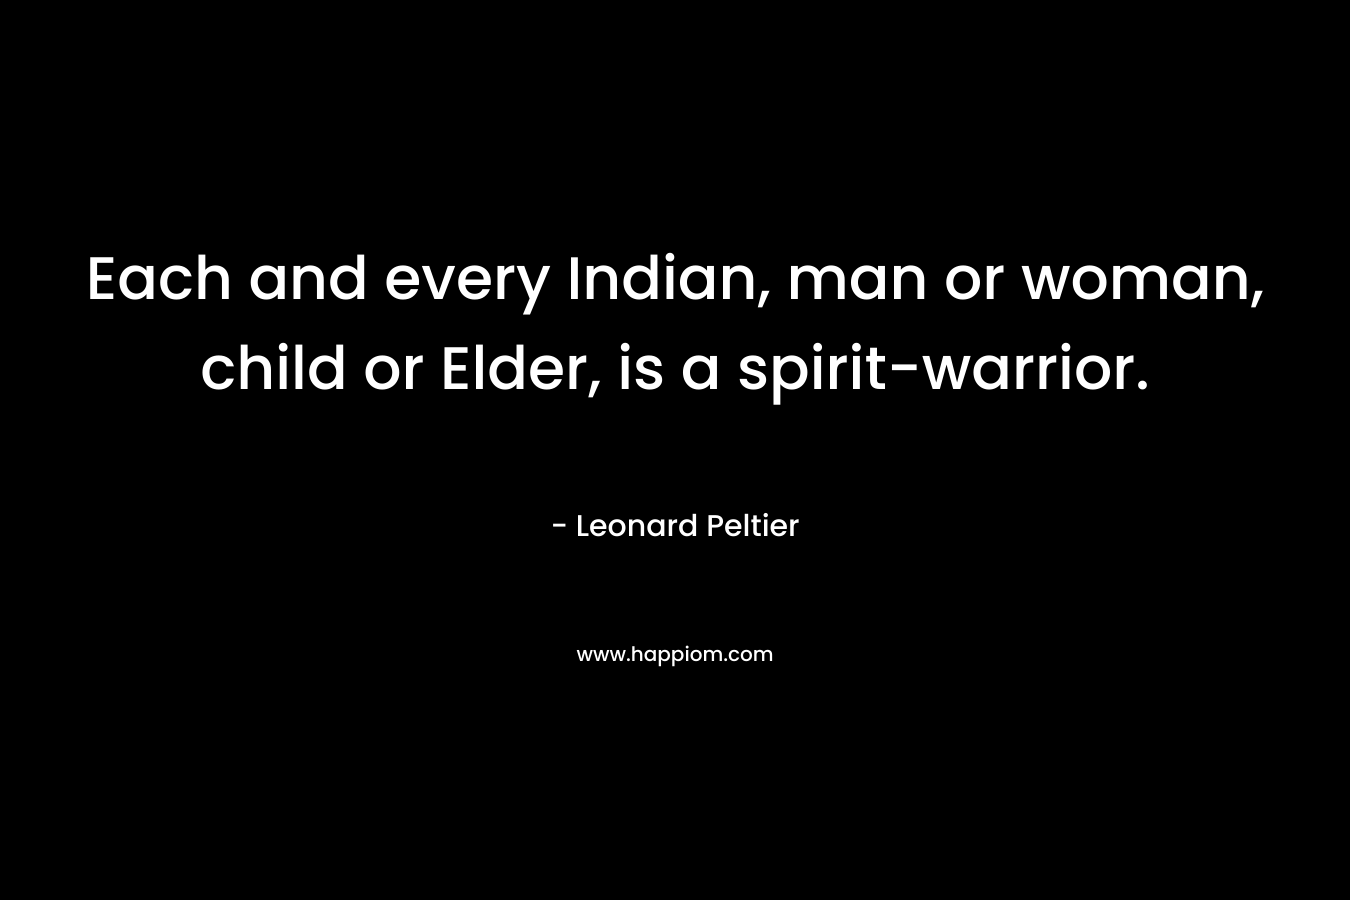 Each and every Indian, man or woman, child or Elder, is a spirit-warrior. – Leonard Peltier